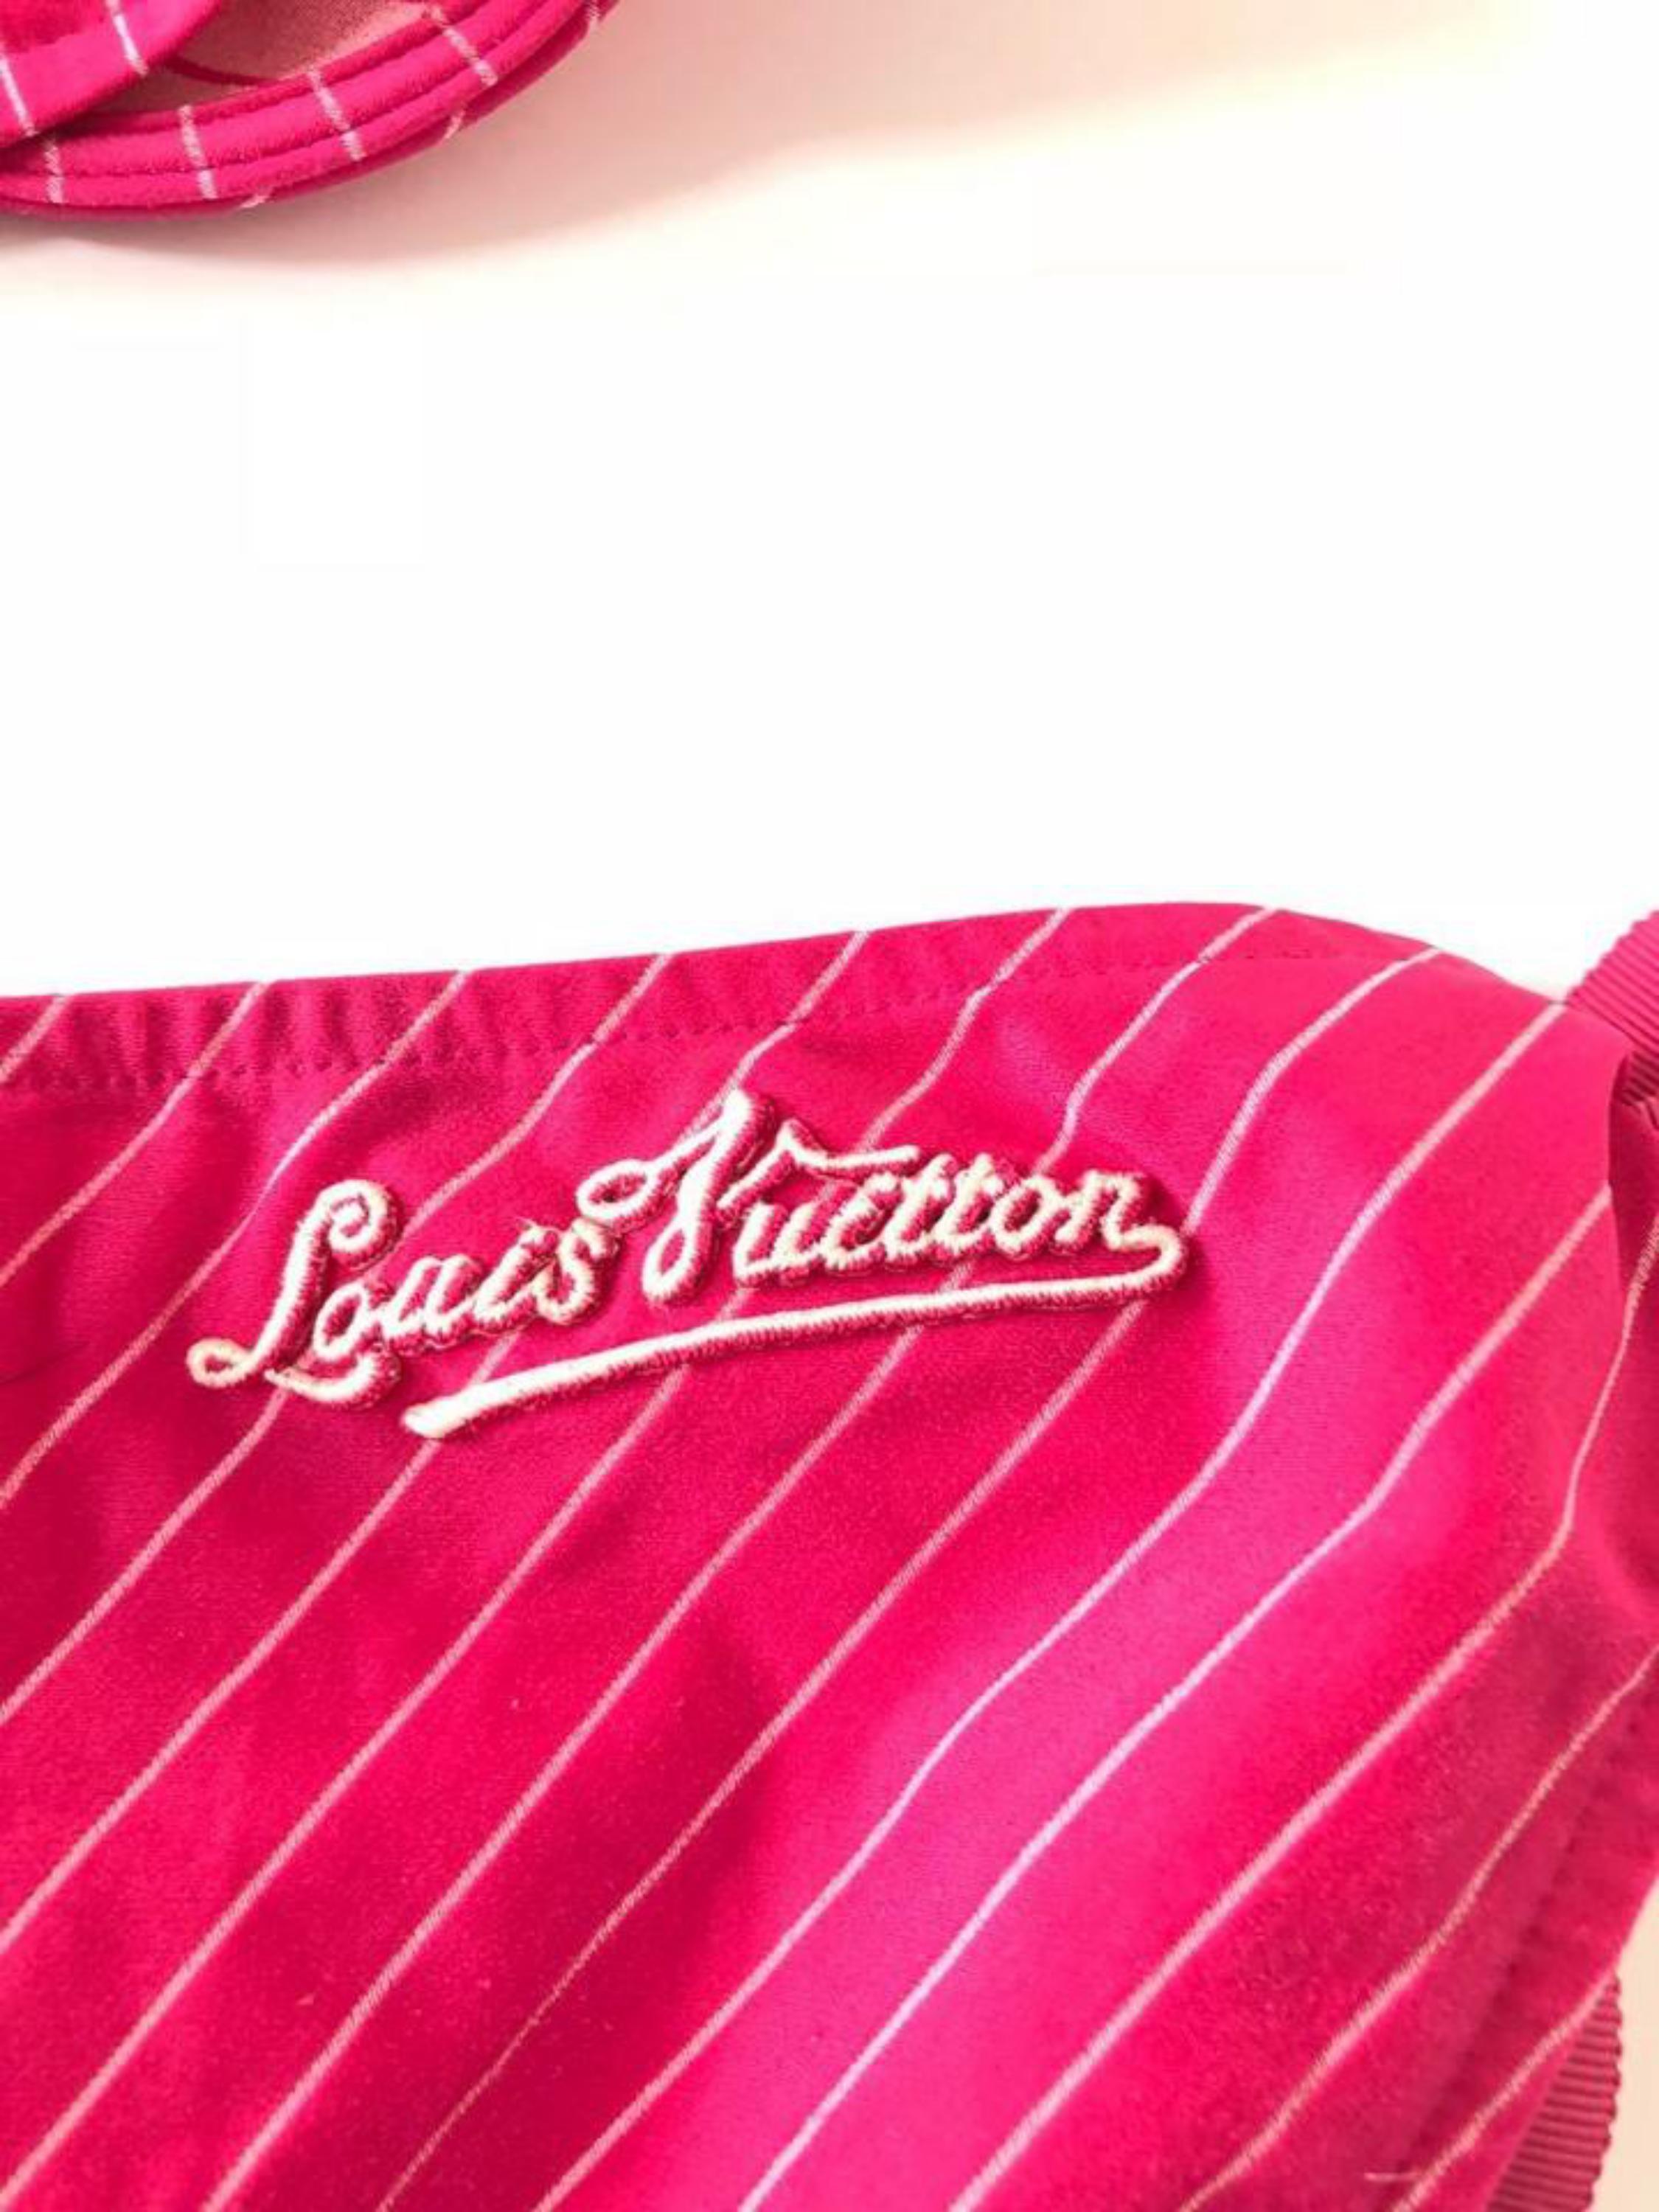 Louis Vuitton Pink Pinstripe Logo Bathing Suit 230446 Bikini Set In Excellent Condition For Sale In Forest Hills, NY